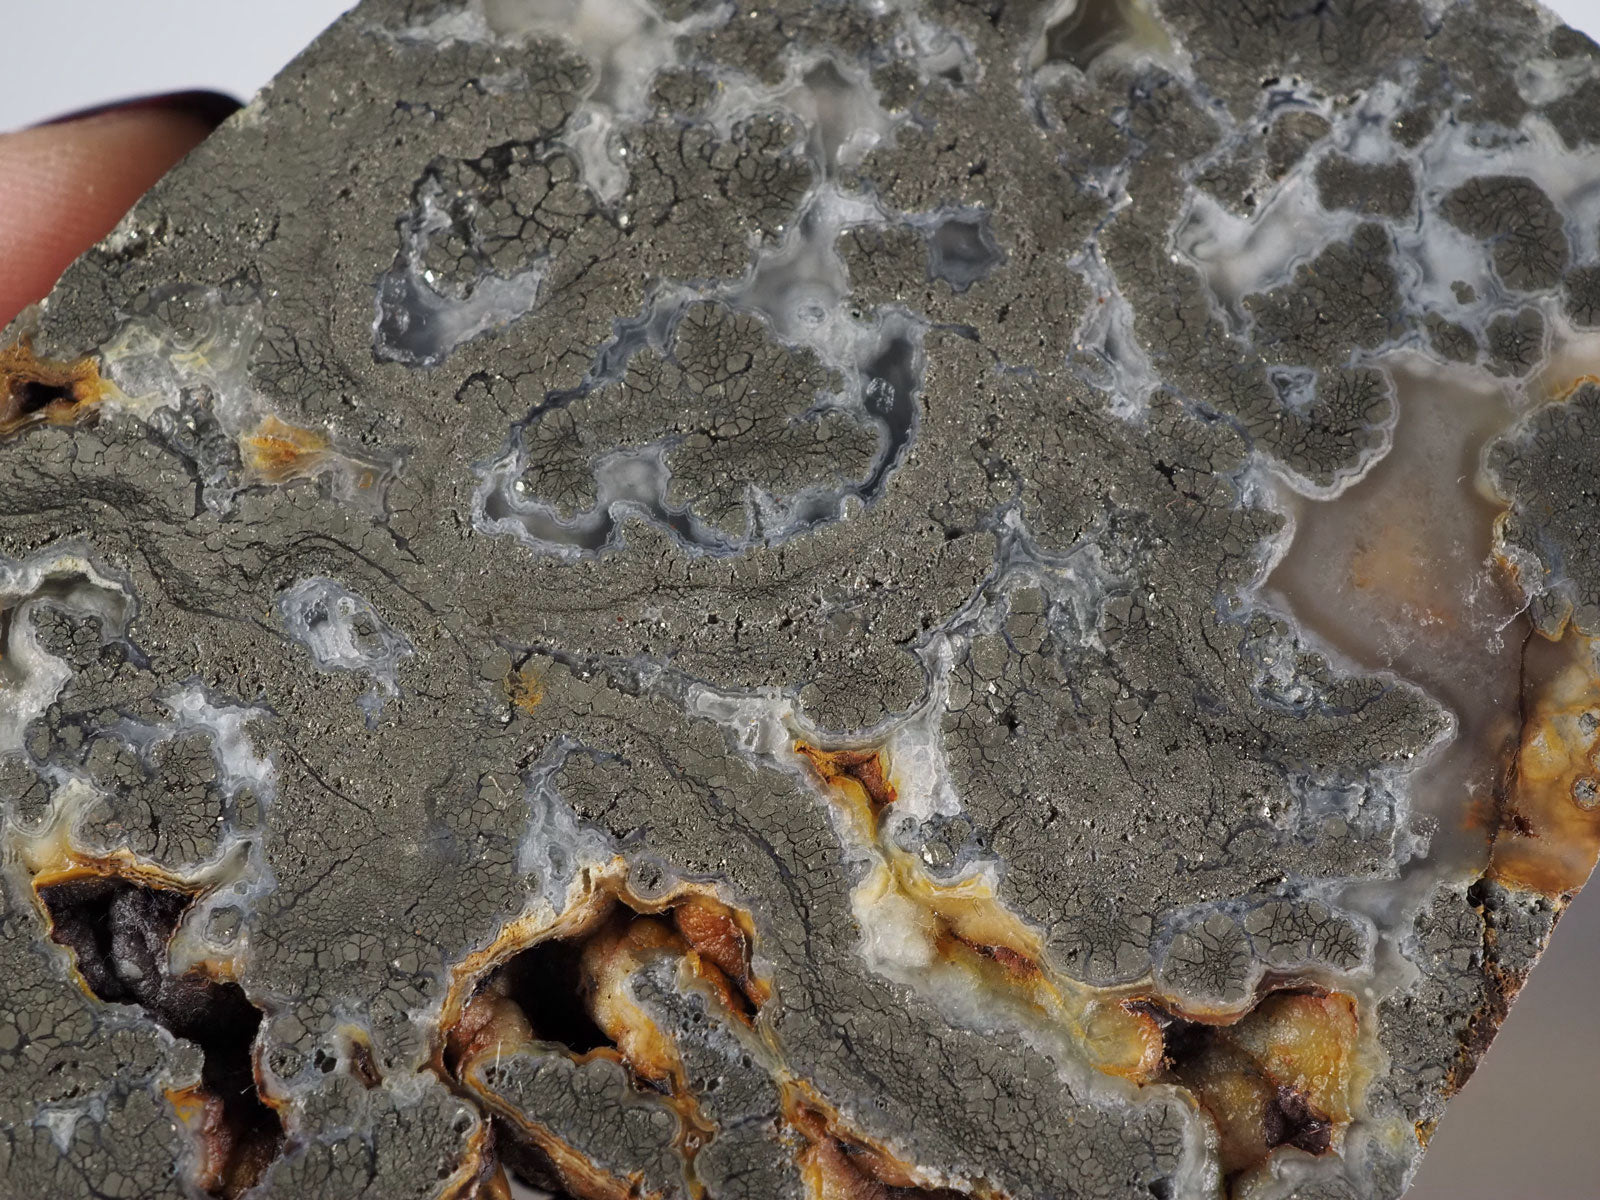 Pyrite Flower Agate Slab with Botryoidal Elements - Closeup